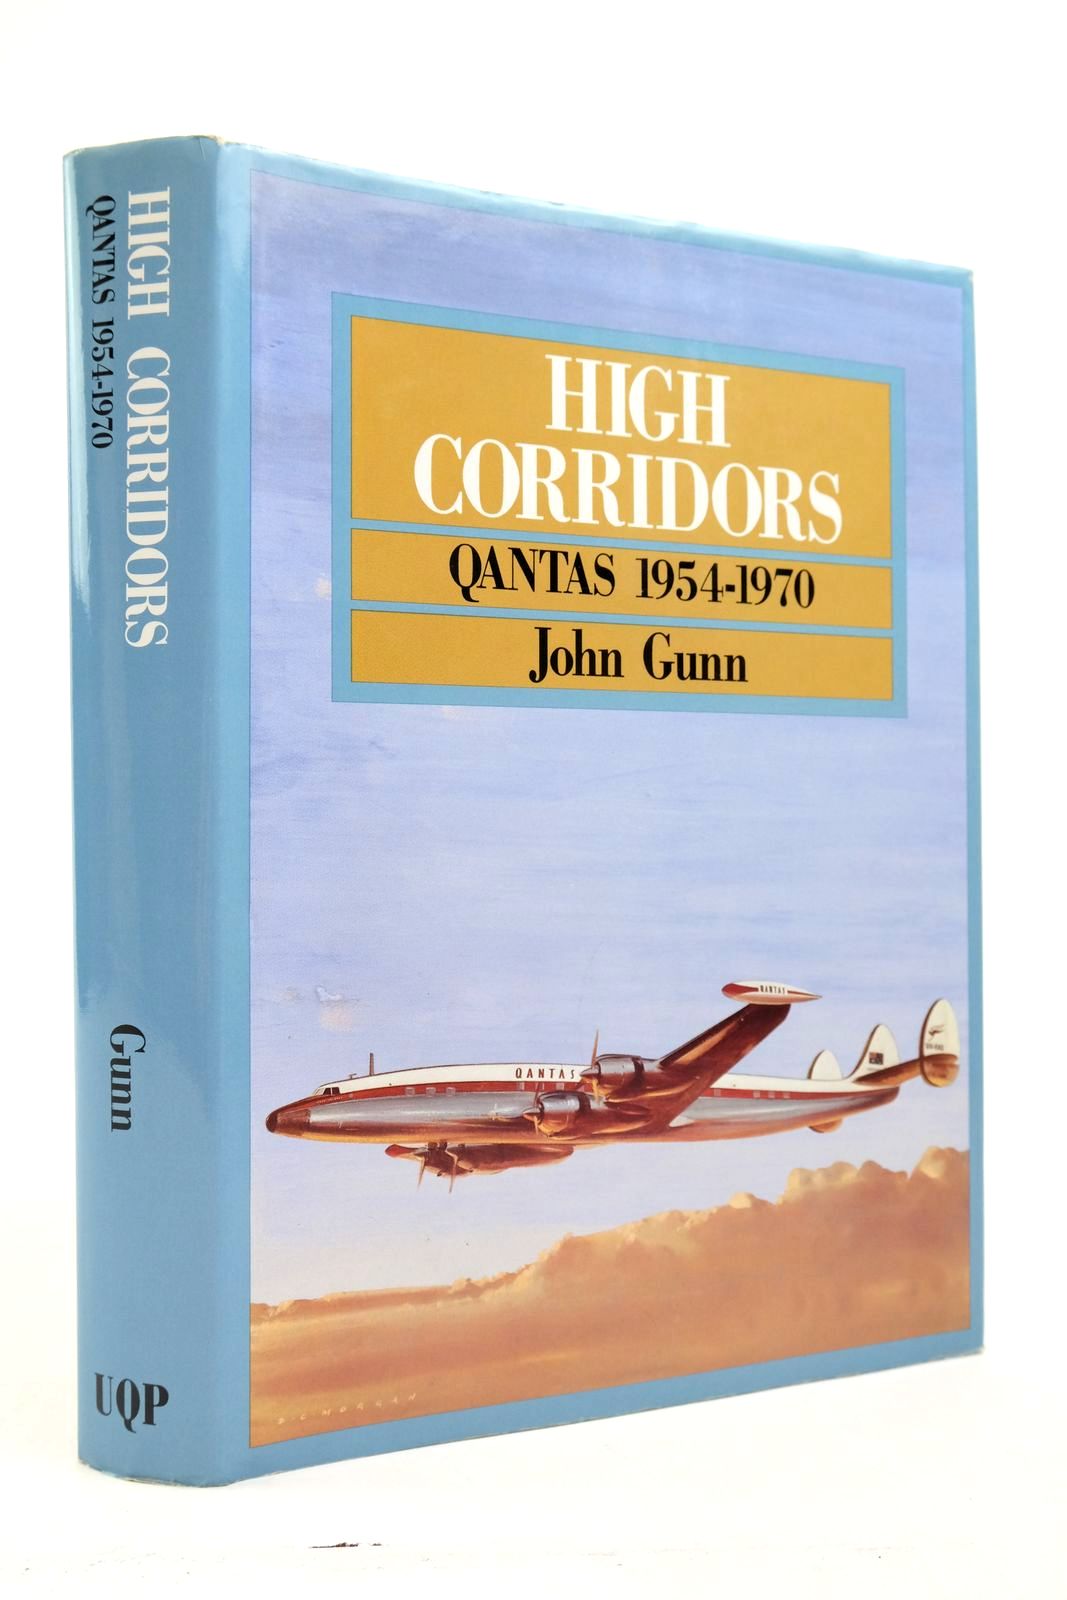 Photo of HIGH CORRIDORS: QANTAS 1954-1970 written by Gunn, John published by University Of Queensland Press (STOCK CODE: 2139263)  for sale by Stella & Rose's Books